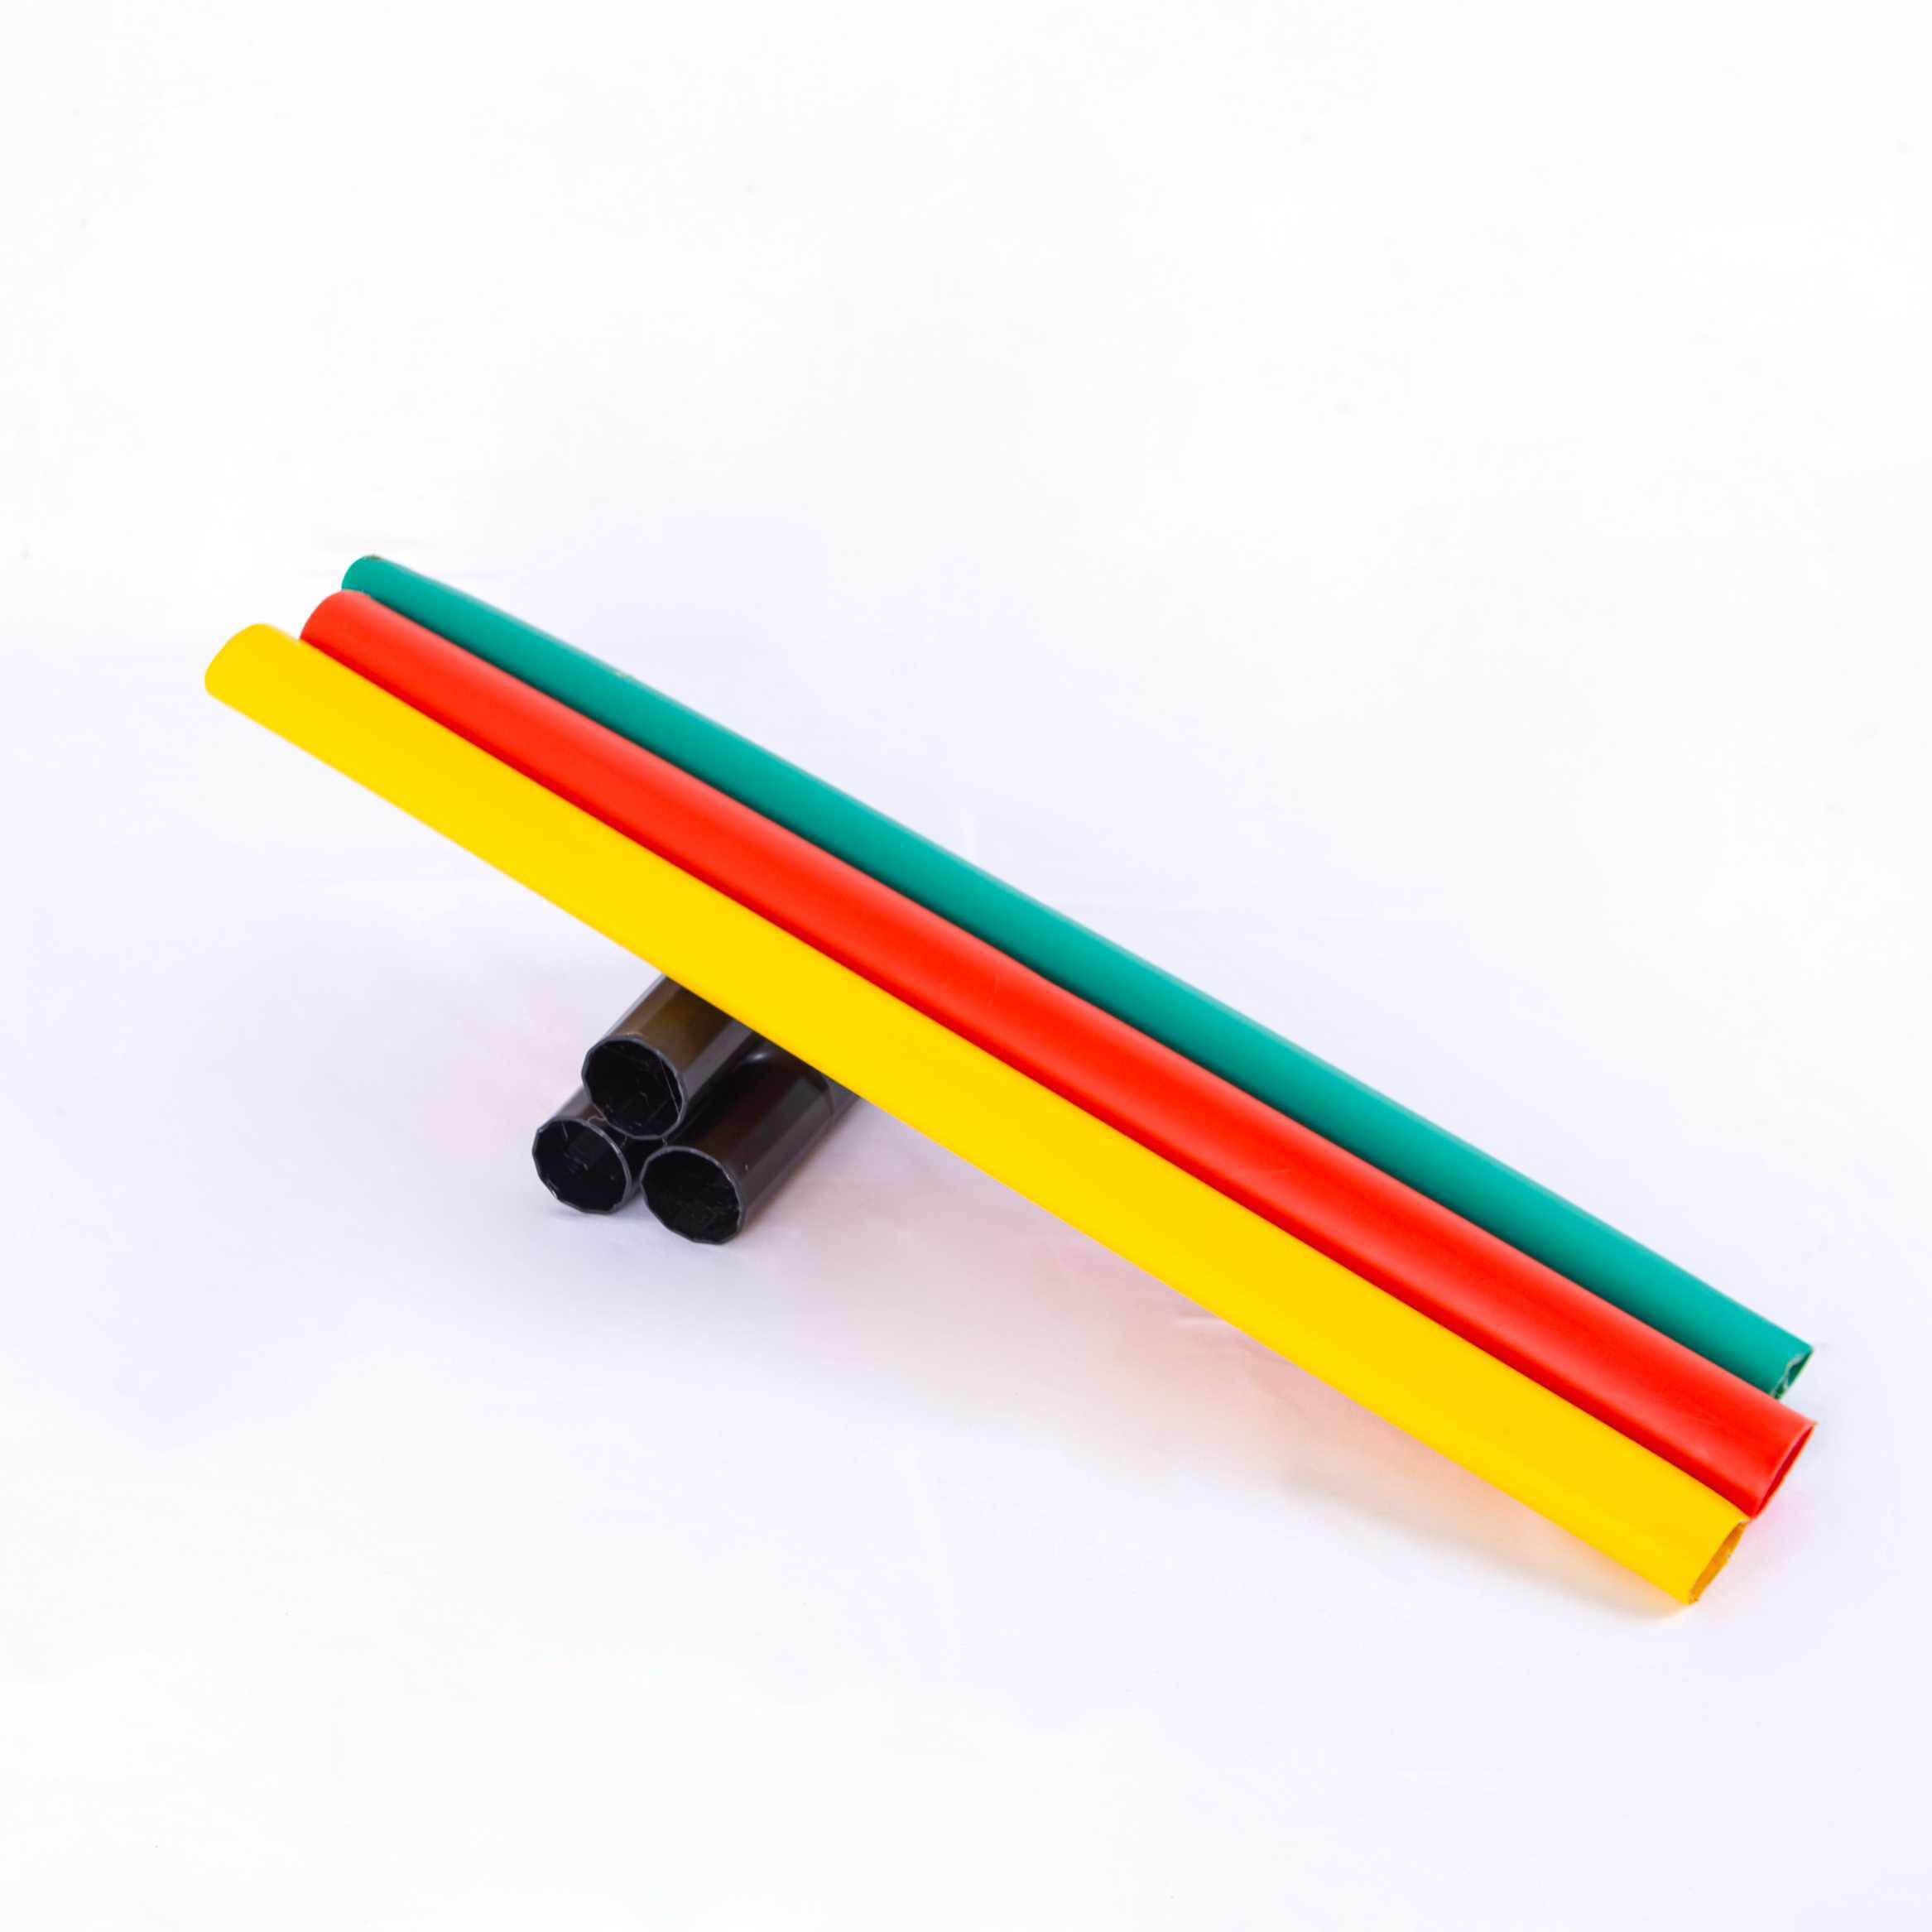 Insulation Cable Ends Joints Heat Shrink Kit Crimping Shrinkable Terminals